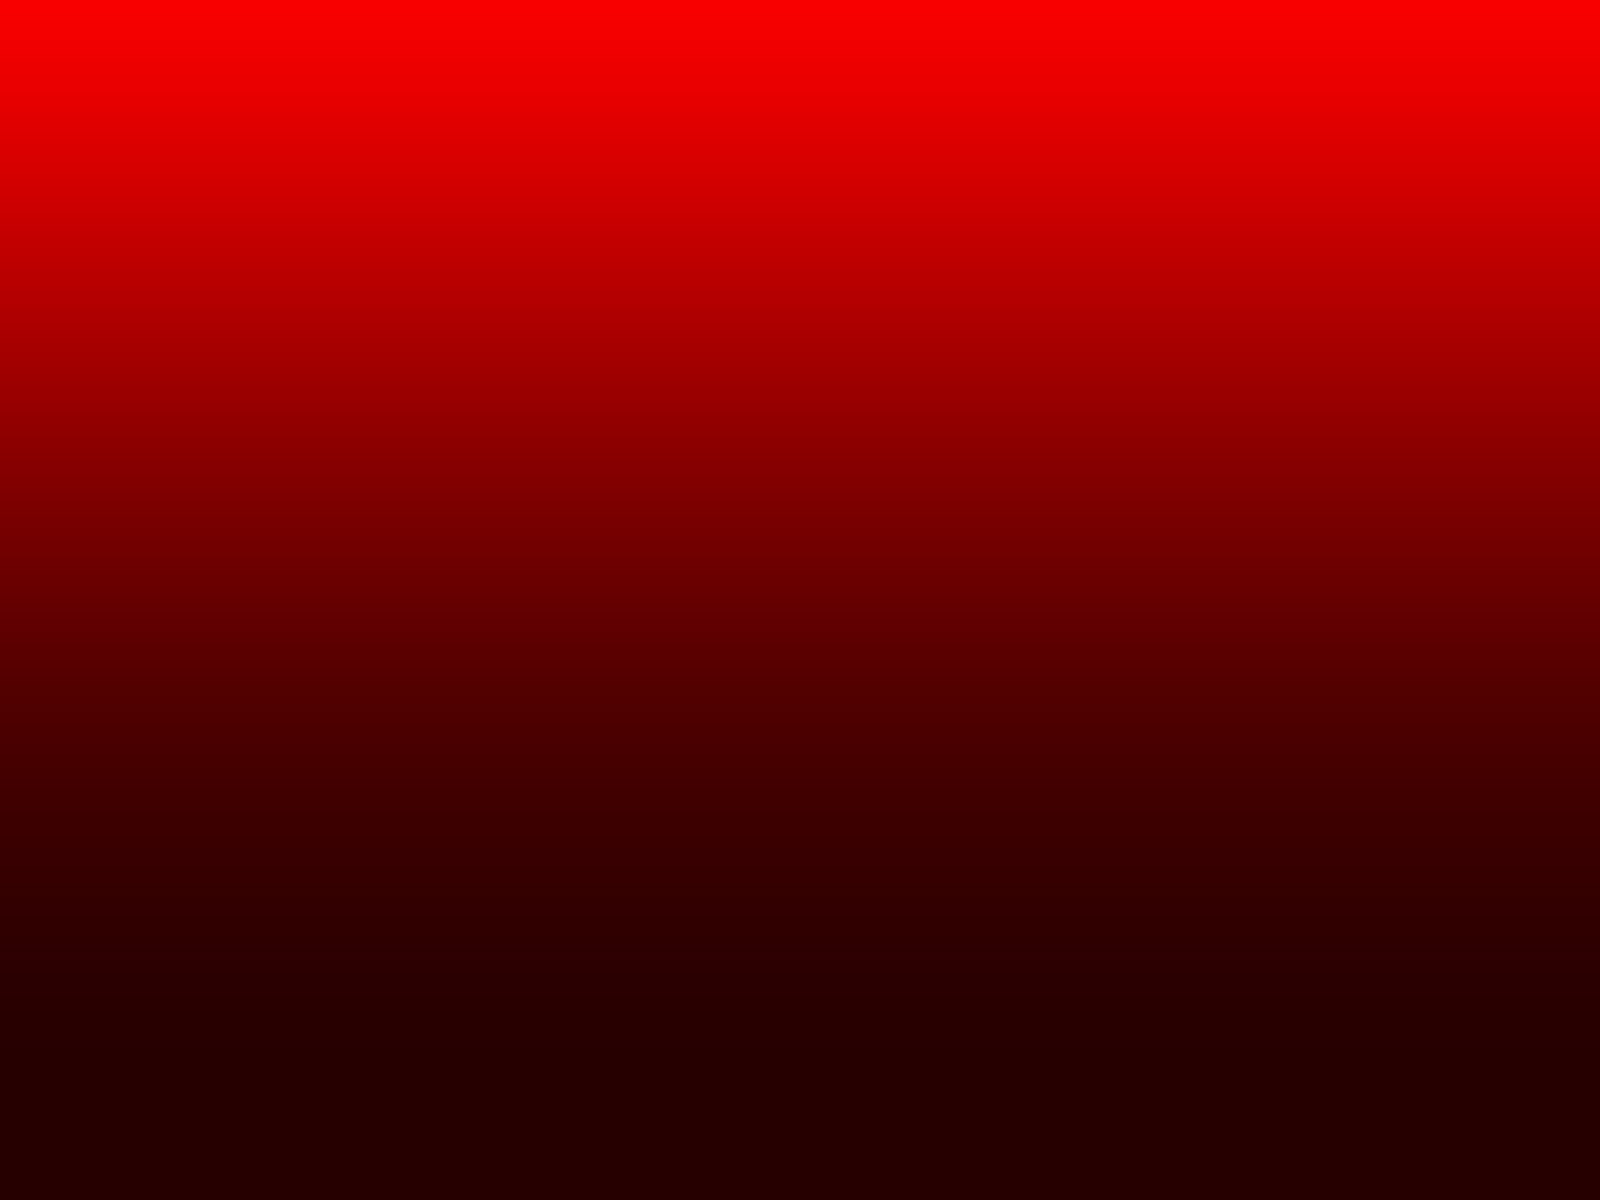 Red Gradient Background Image Pictures Becuo